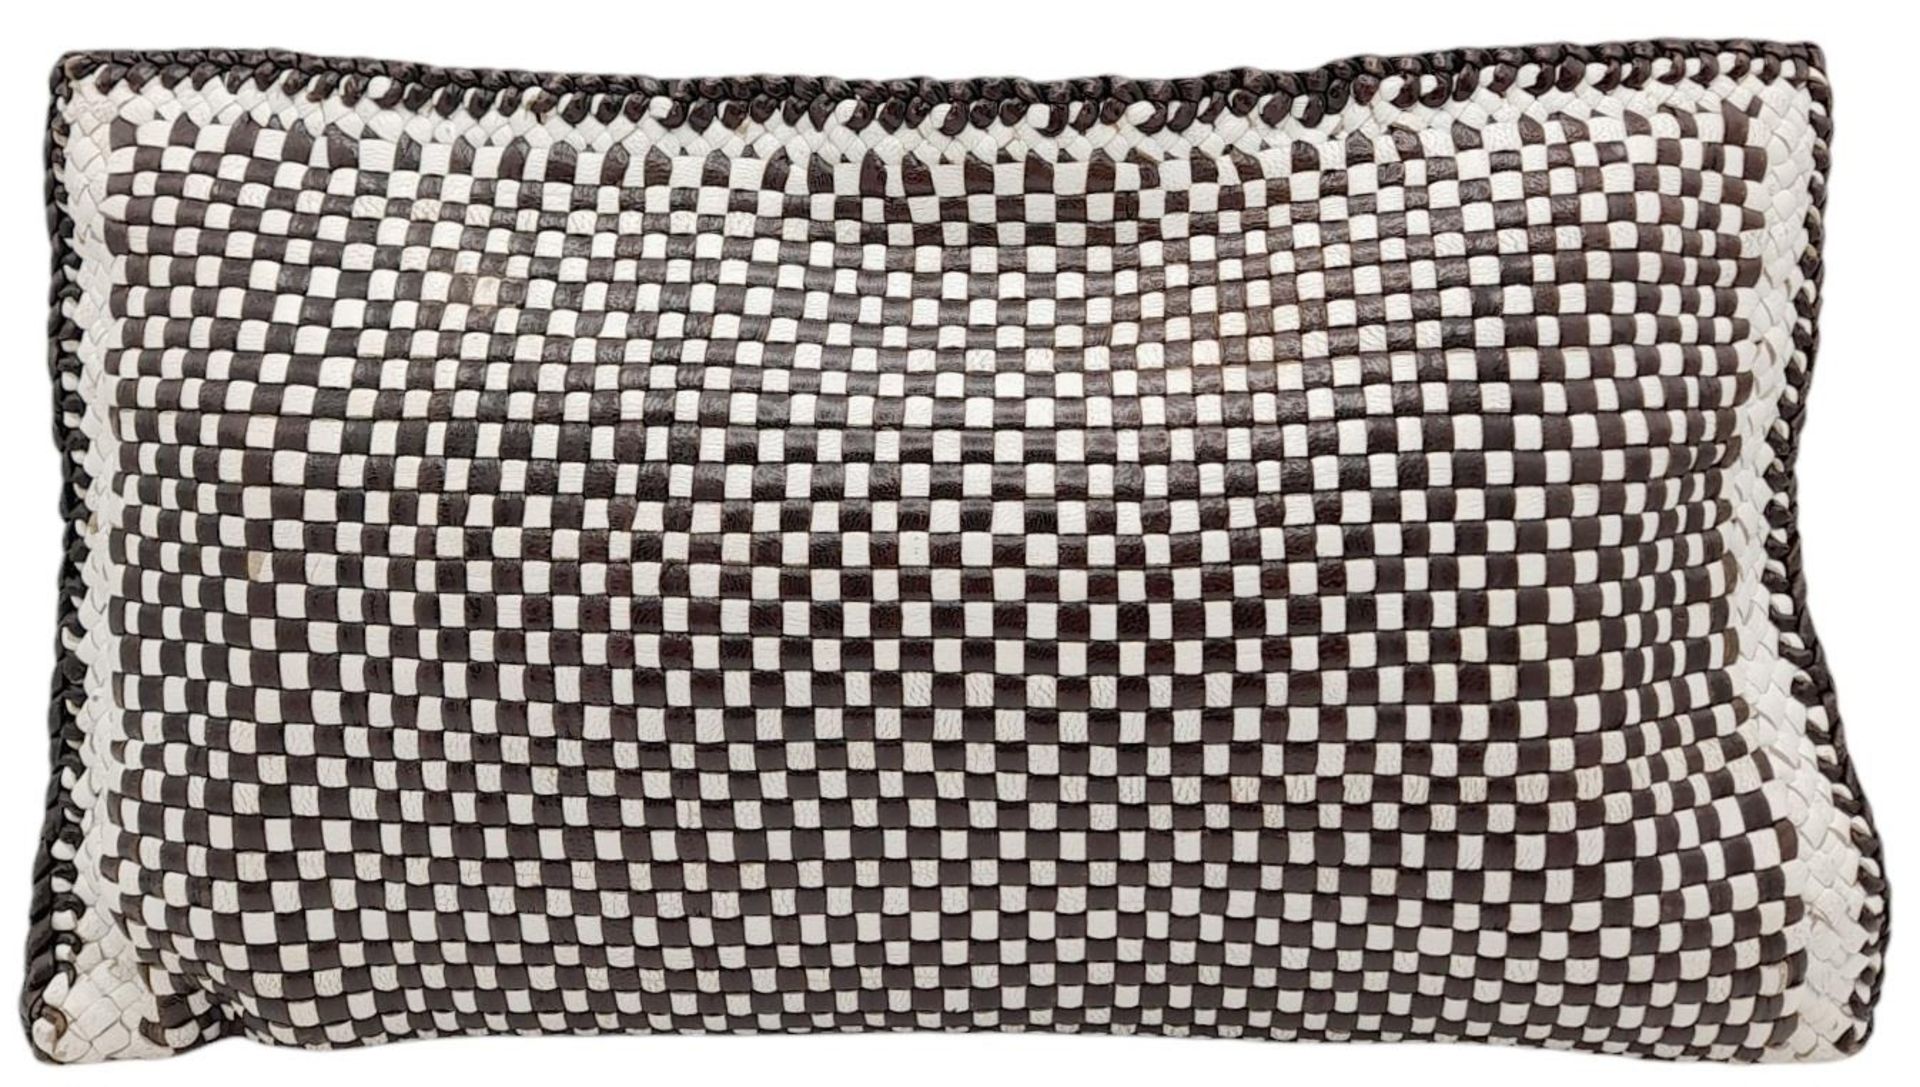 A Prada Black and White 'Madras' Clutch Bag. Woven leather exterior with gold-toned hardware and - Bild 3 aus 9